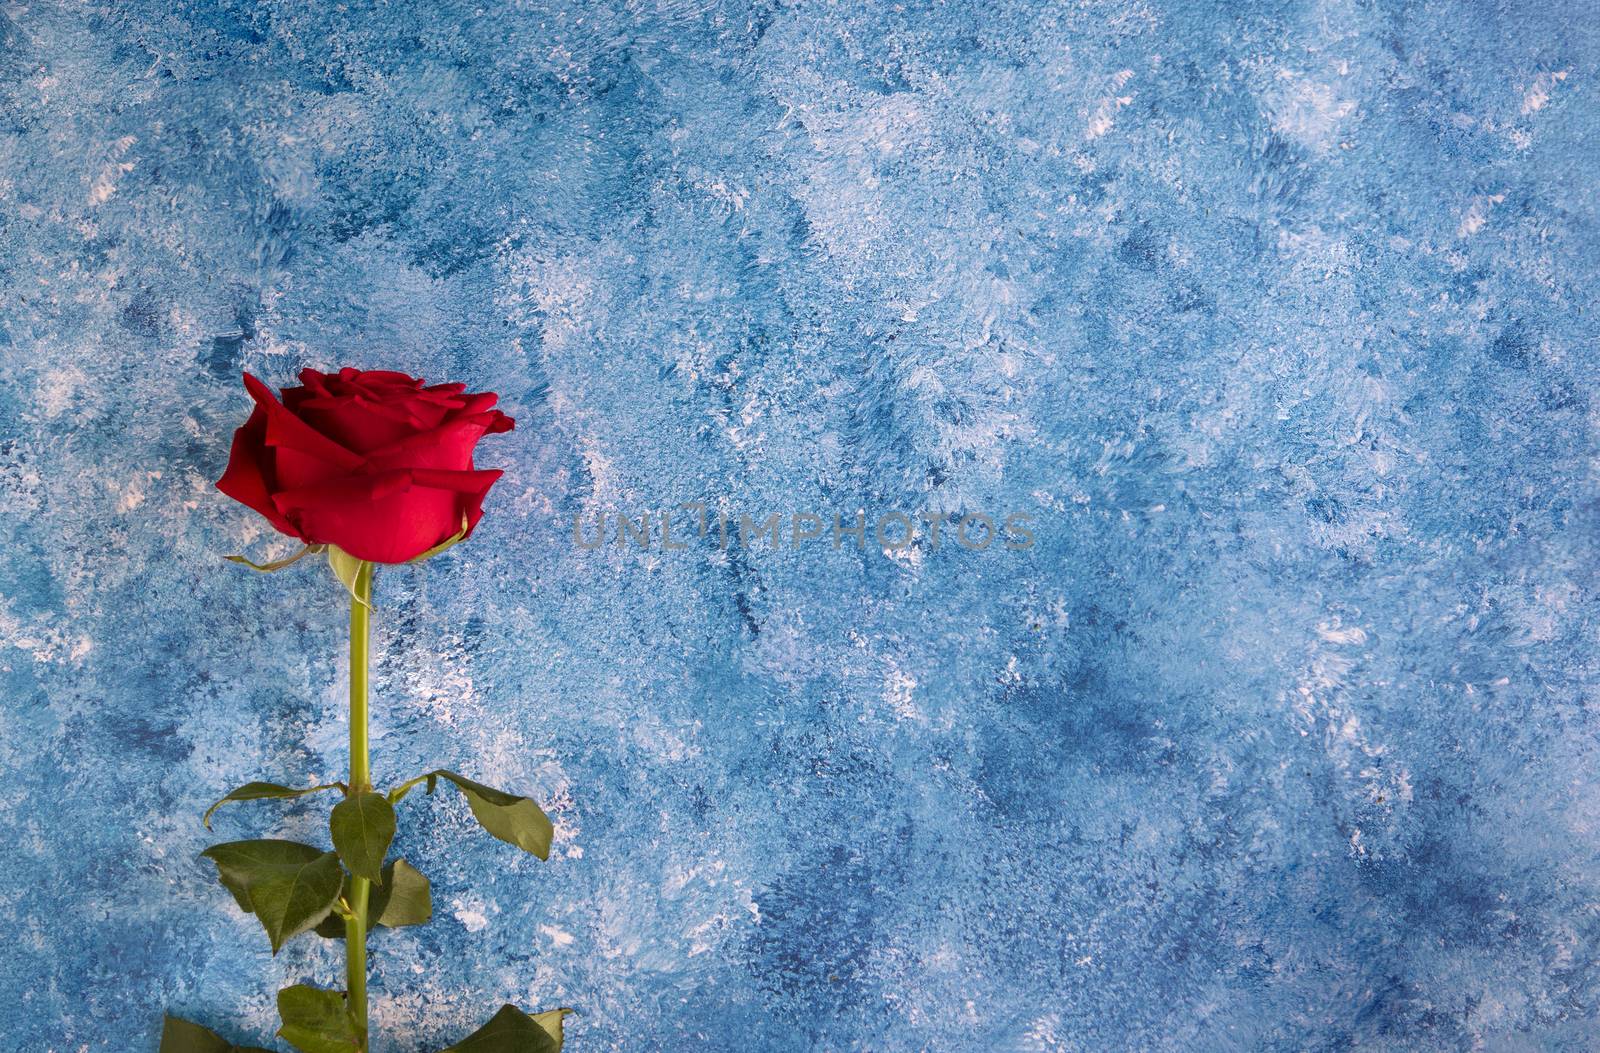 A beautiful single blooming red rose on blue and white acrylic background.